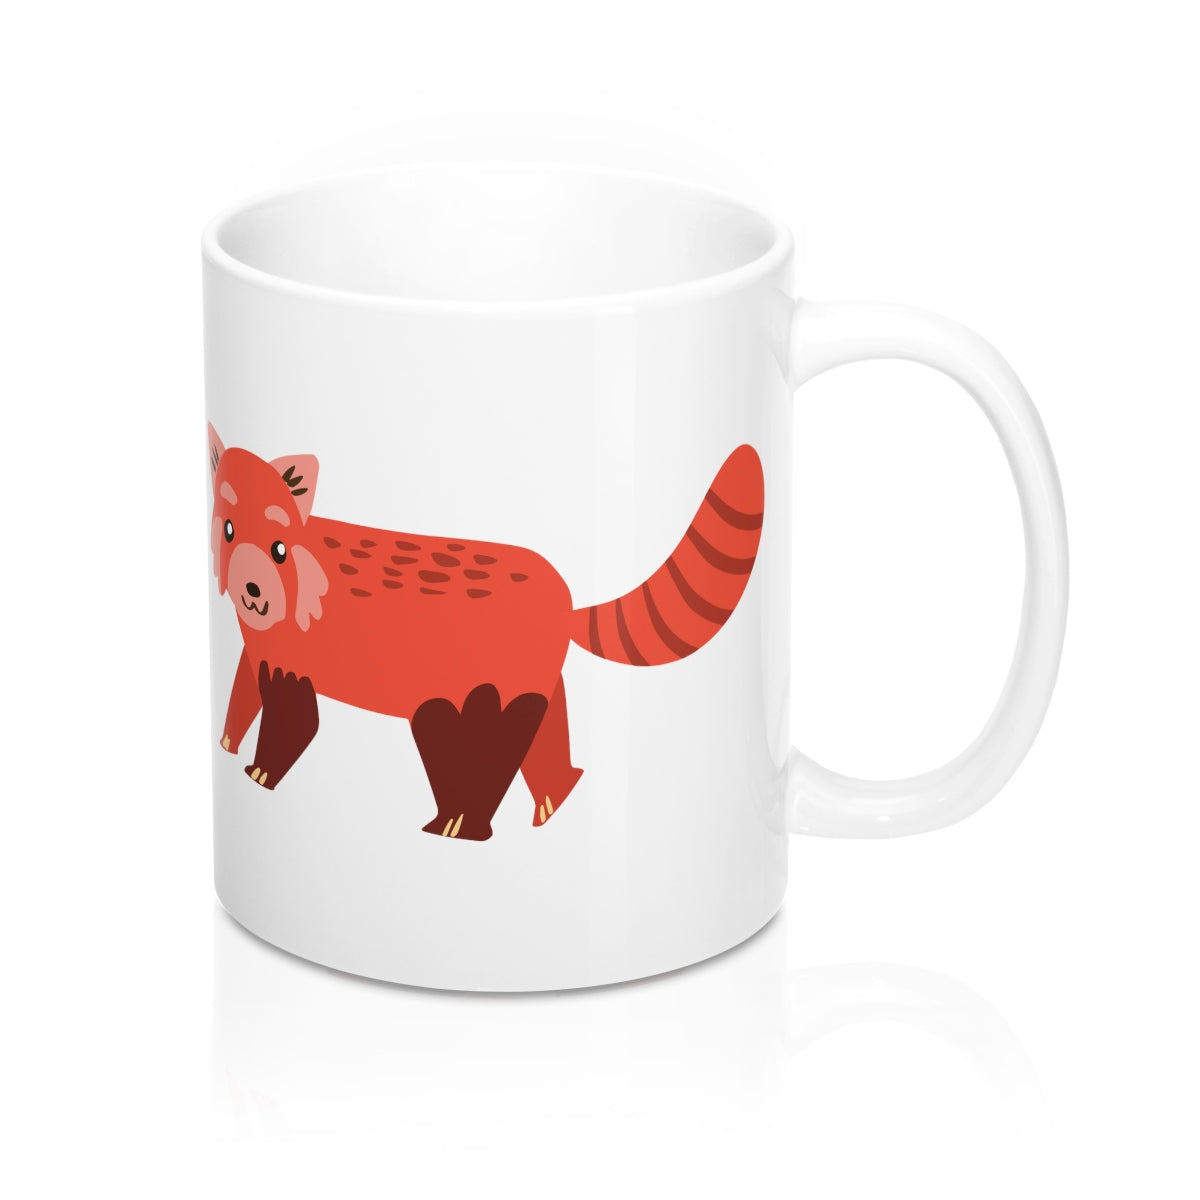 Red Panda Mug, Animal Bear Illustration Ceramic Gifts Cute Coffee Cup Tea Lover Unique Novelty Cool Gift Starcove Fashion